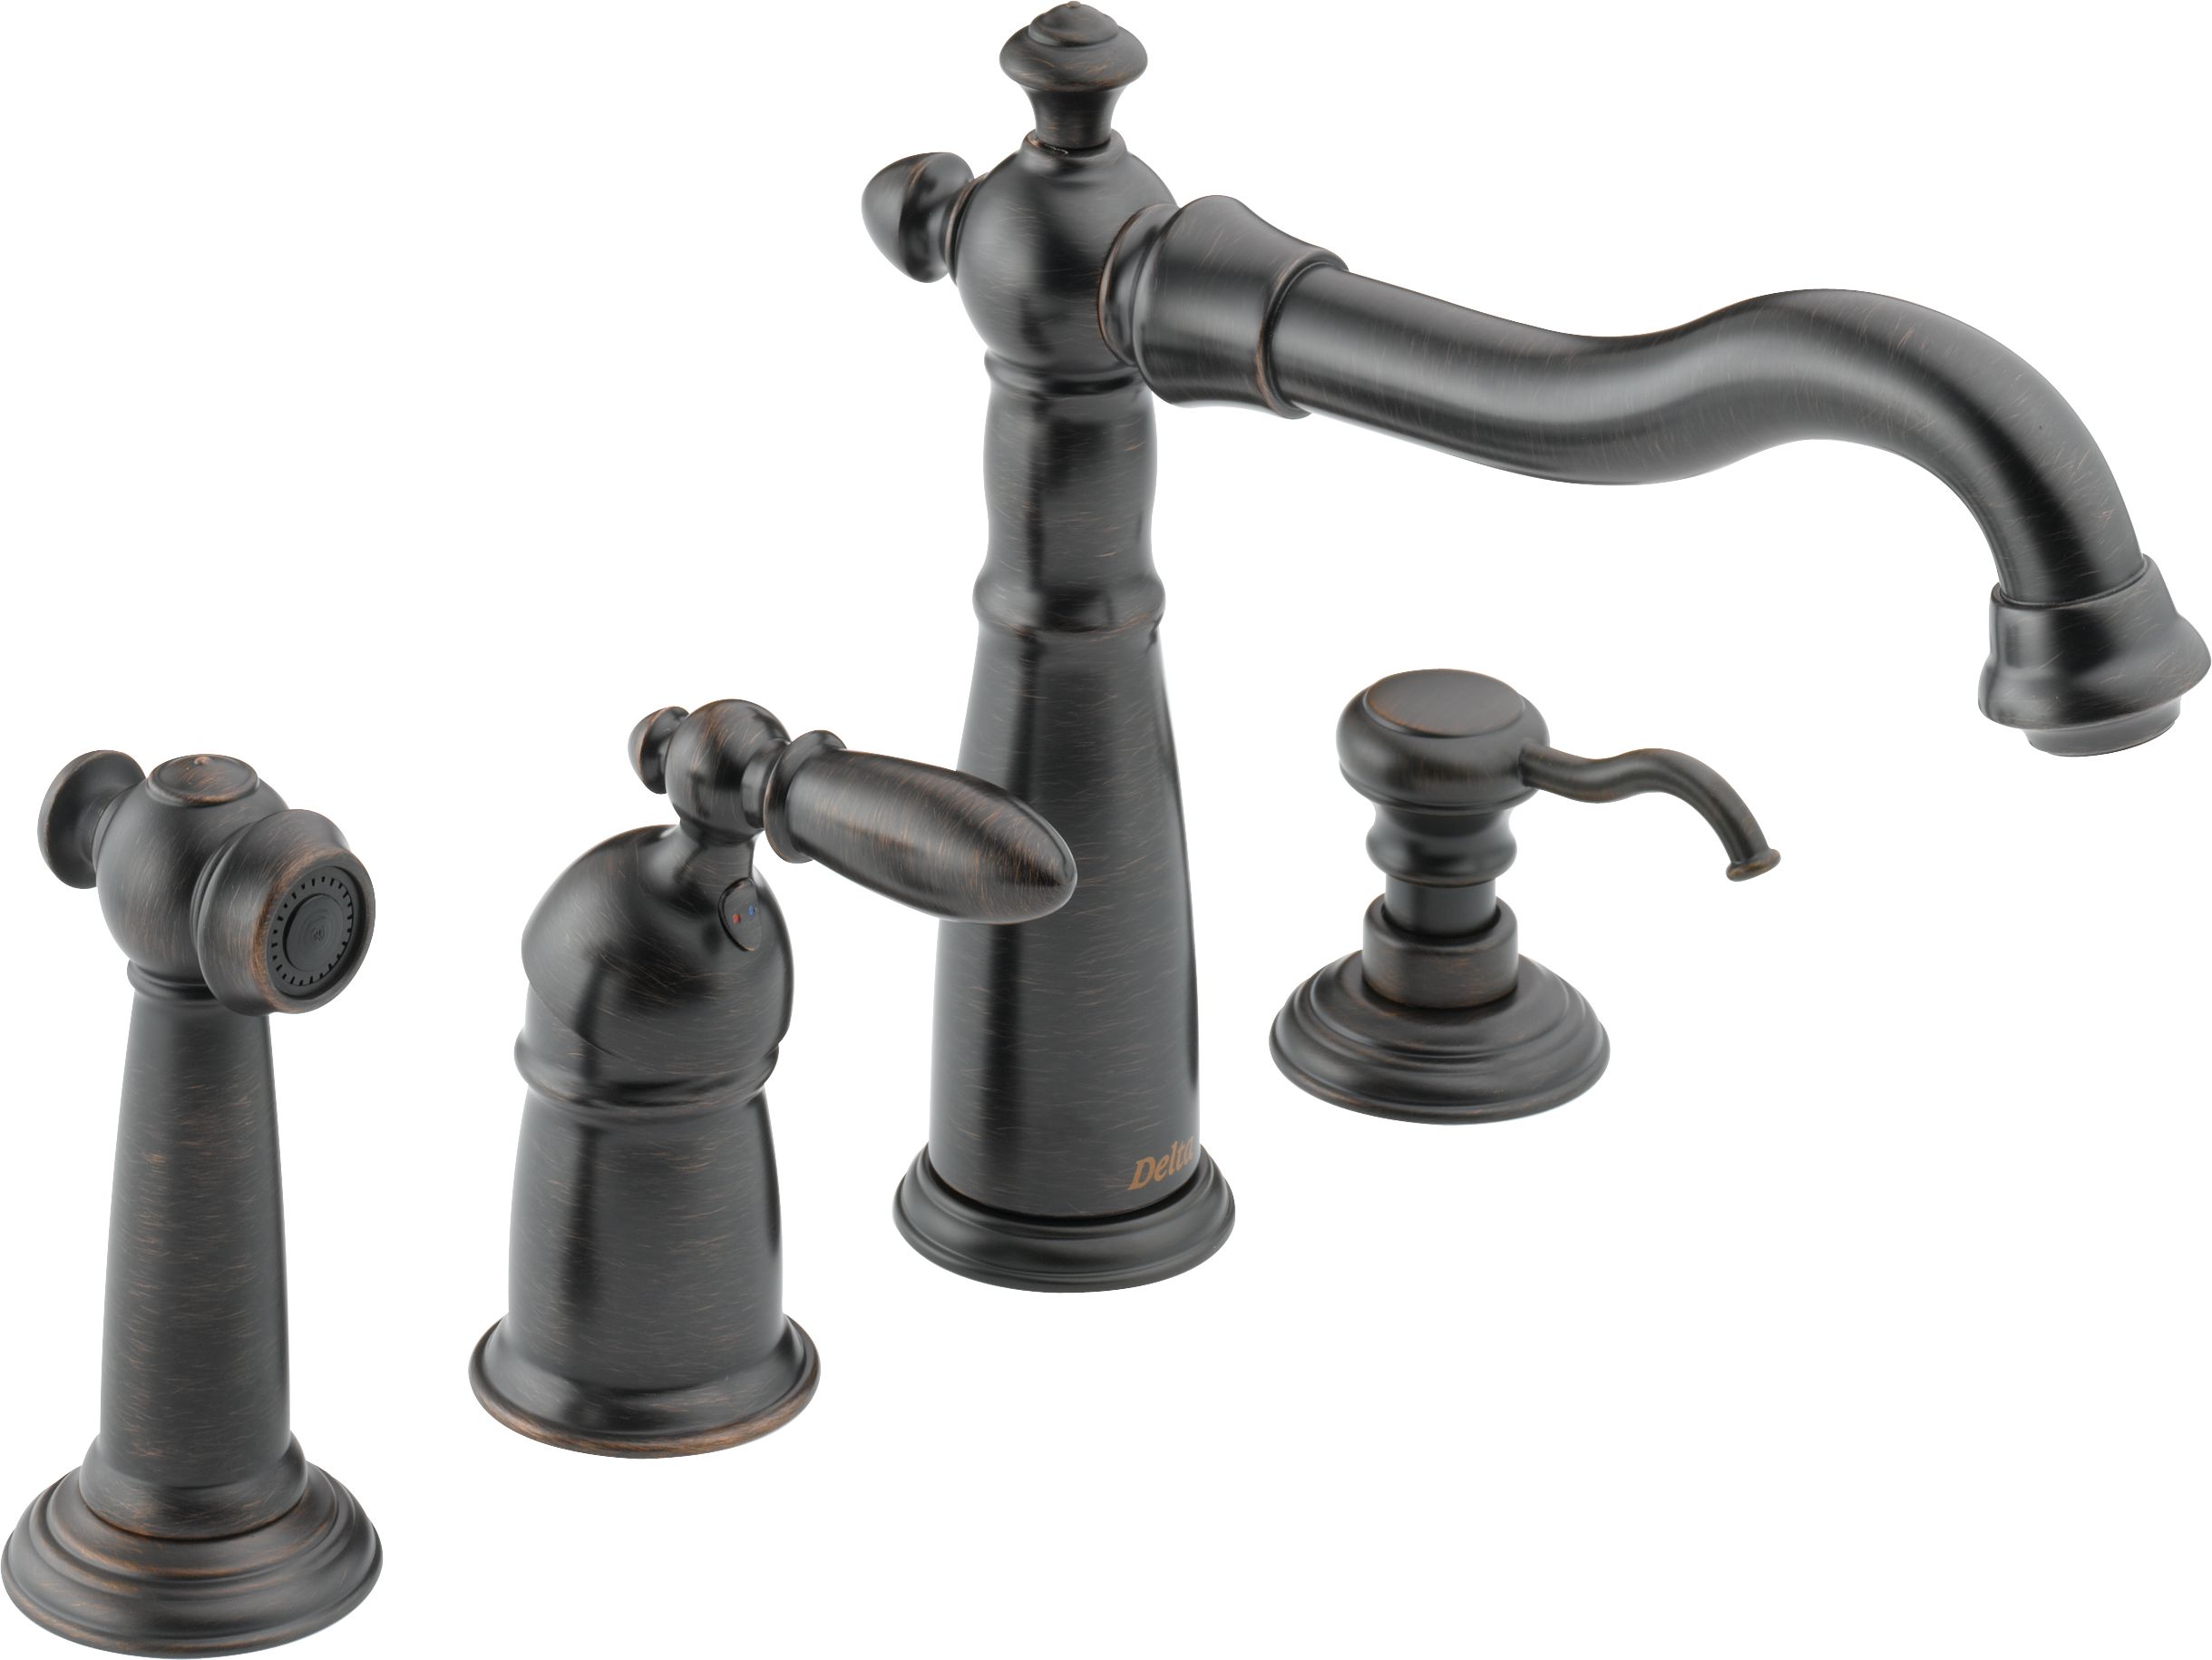 delta dst faucet for the bathroom sink